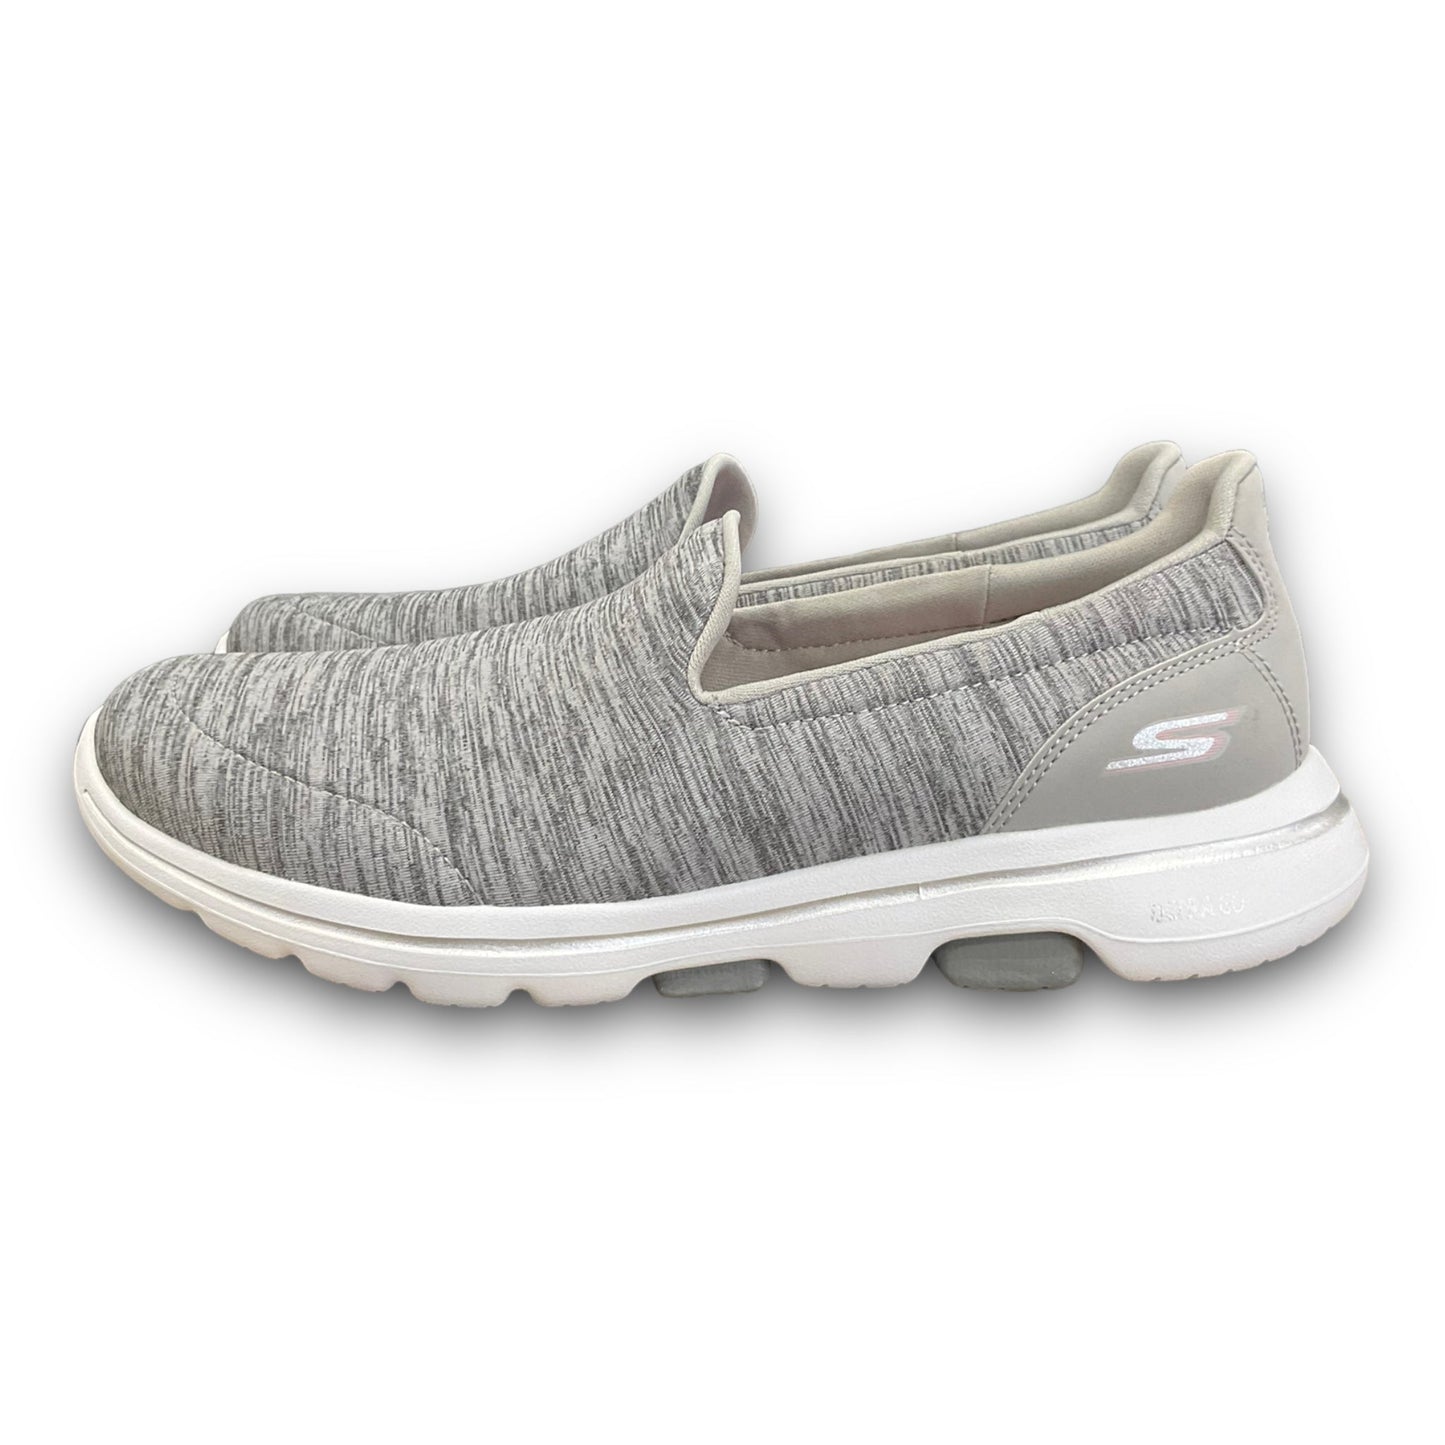 Grey Shoes Athletic Skechers, Size 8